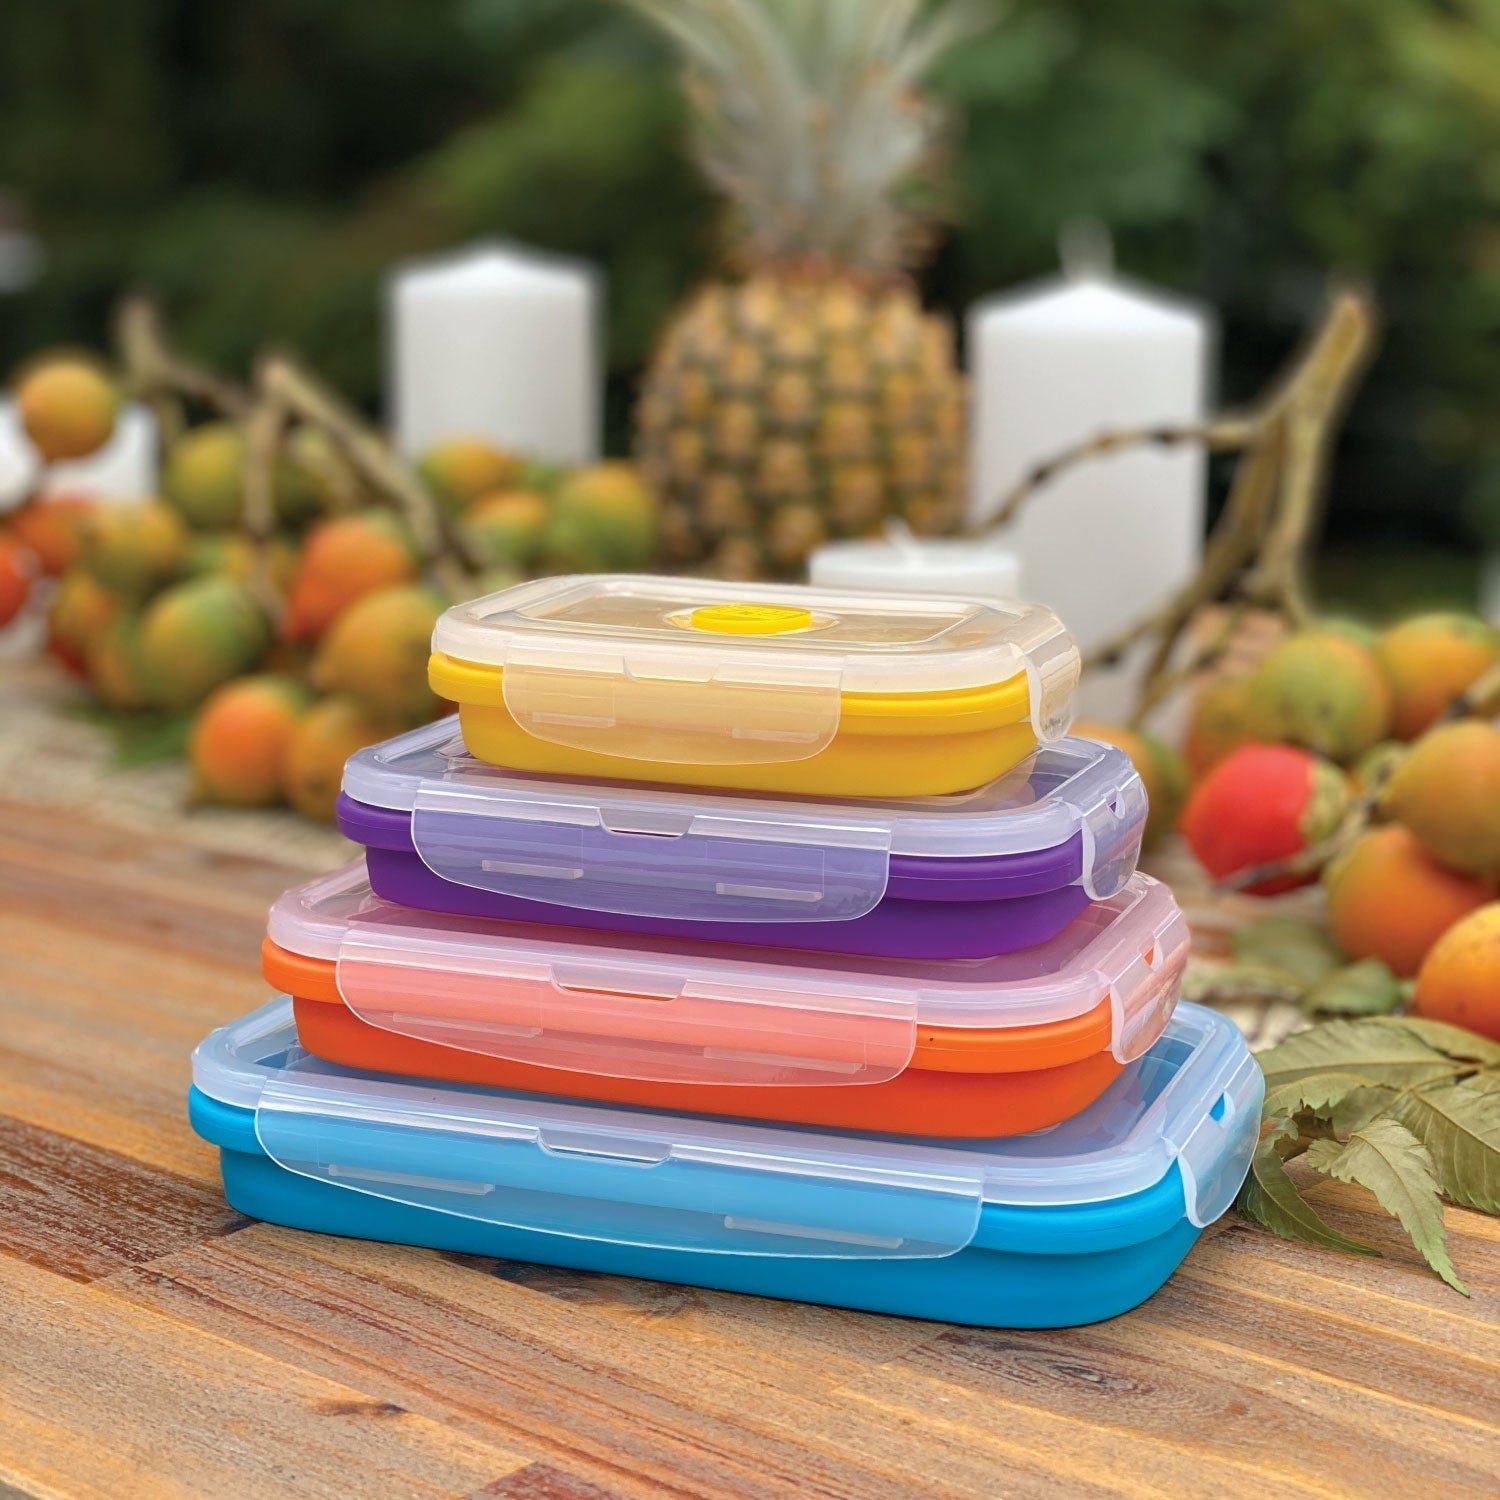 Aced Set of 4 Flat Stacks Collapsible Storage Containers Set- BPA Free Food Storage Containers with Lids, Collapsible Bowls for Meal Prep, Travel